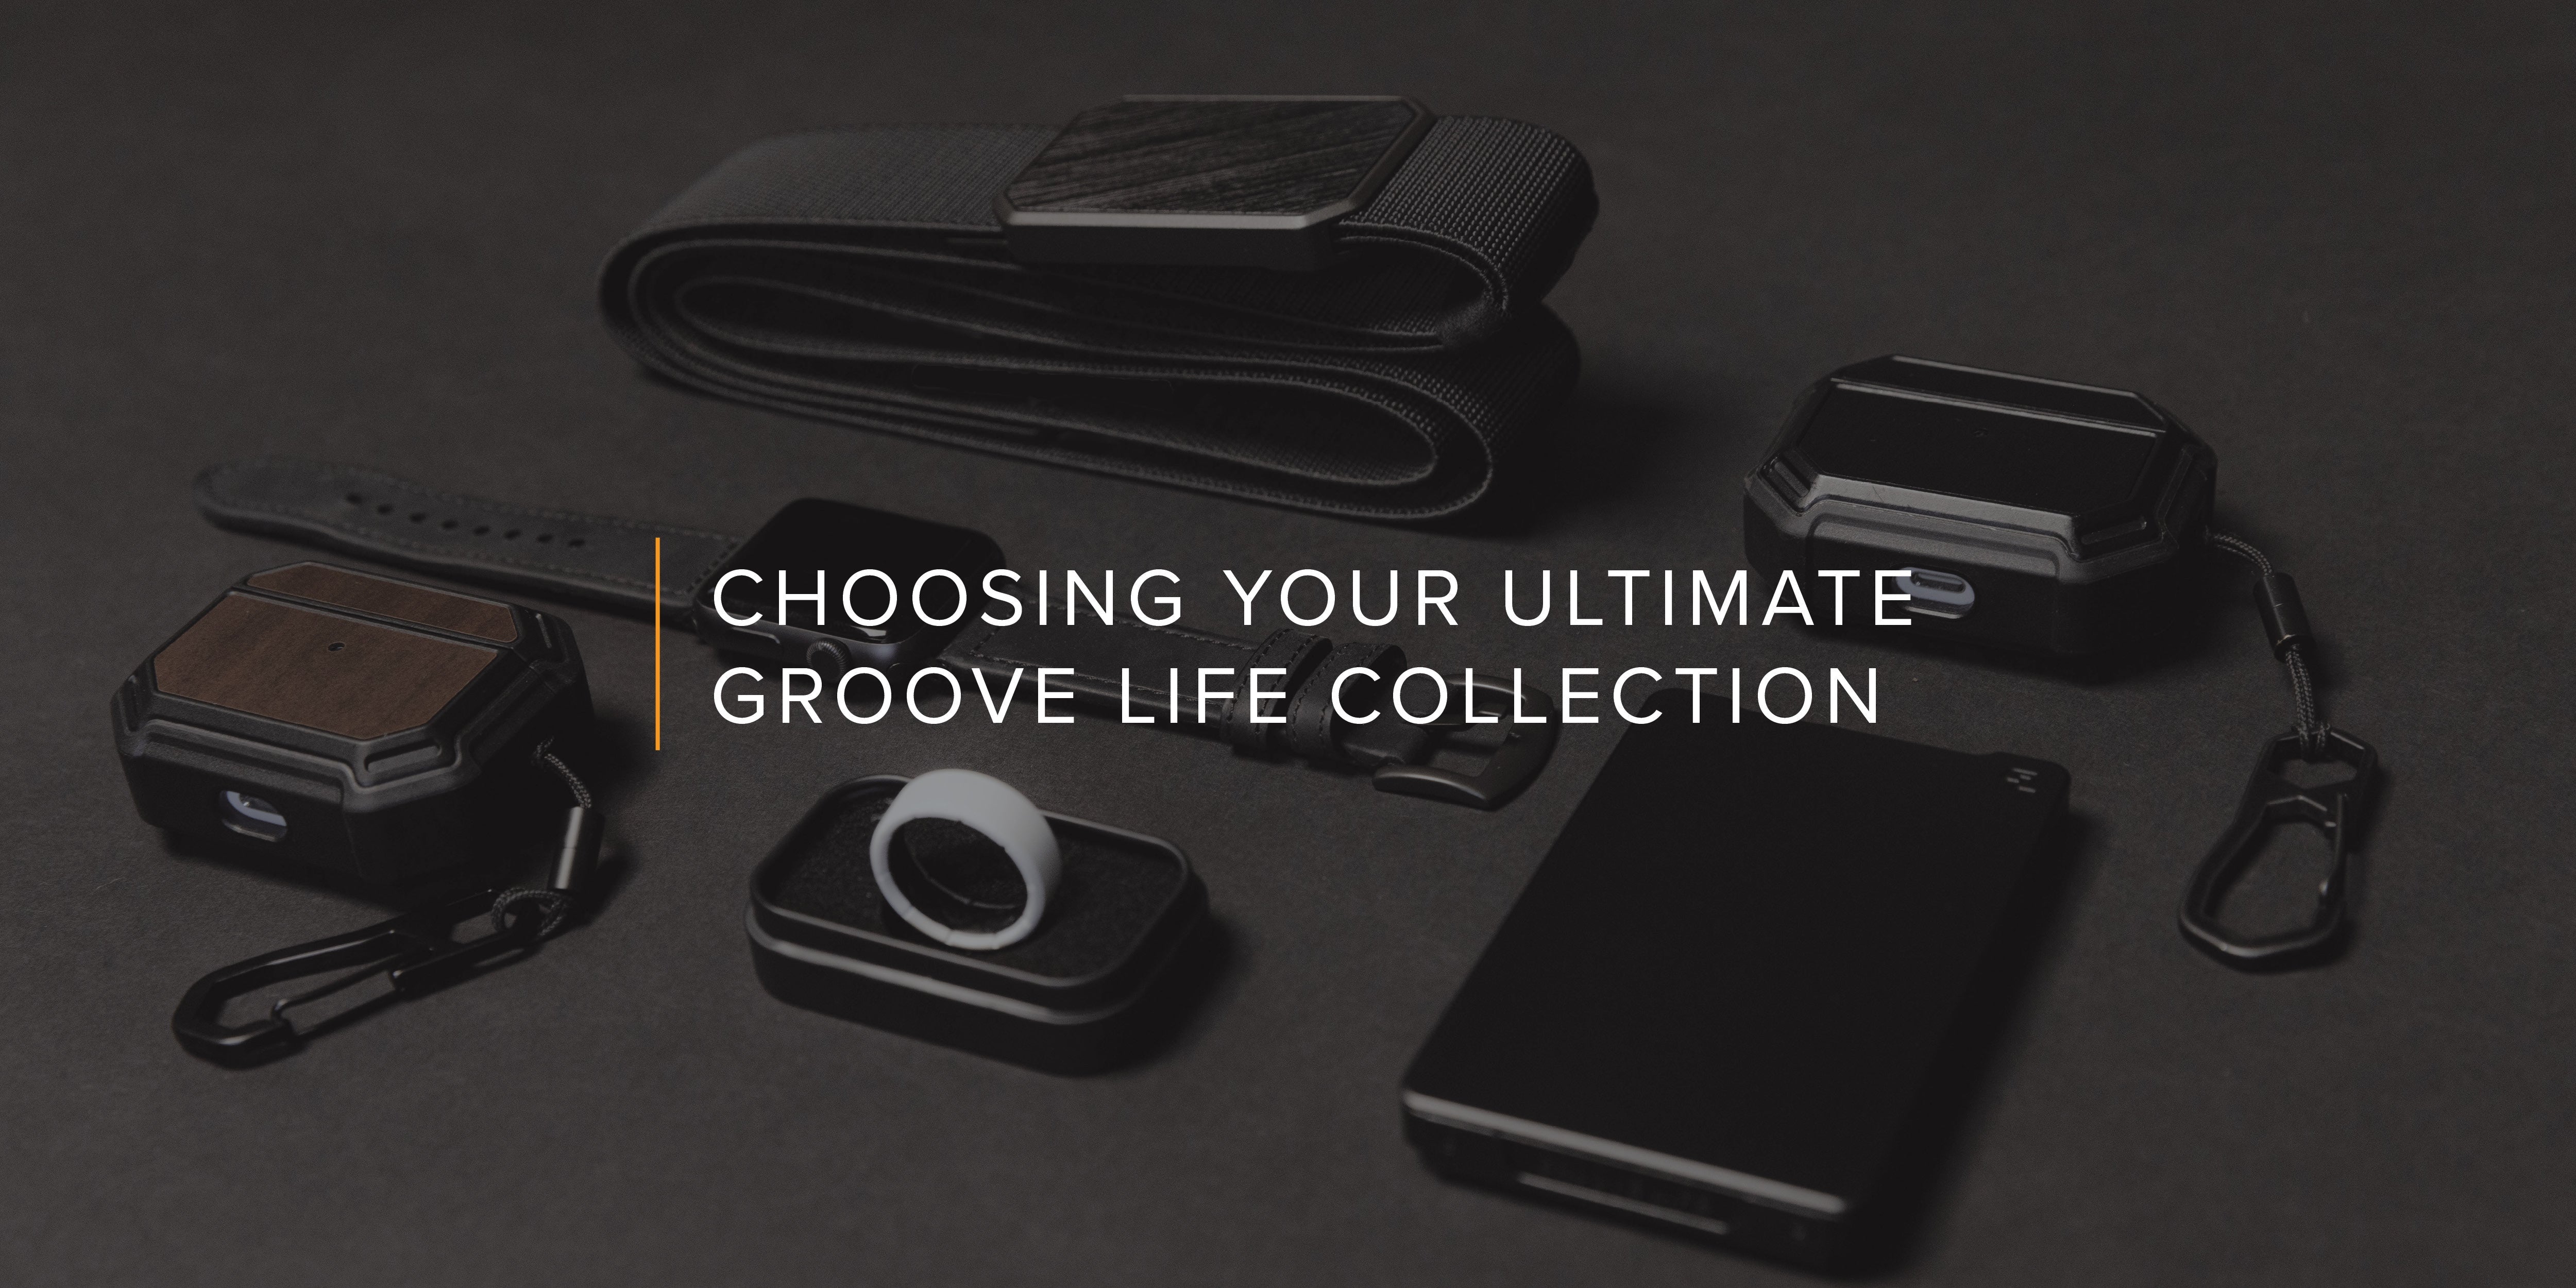 Choosing Your Ultimate Groove Life Collection